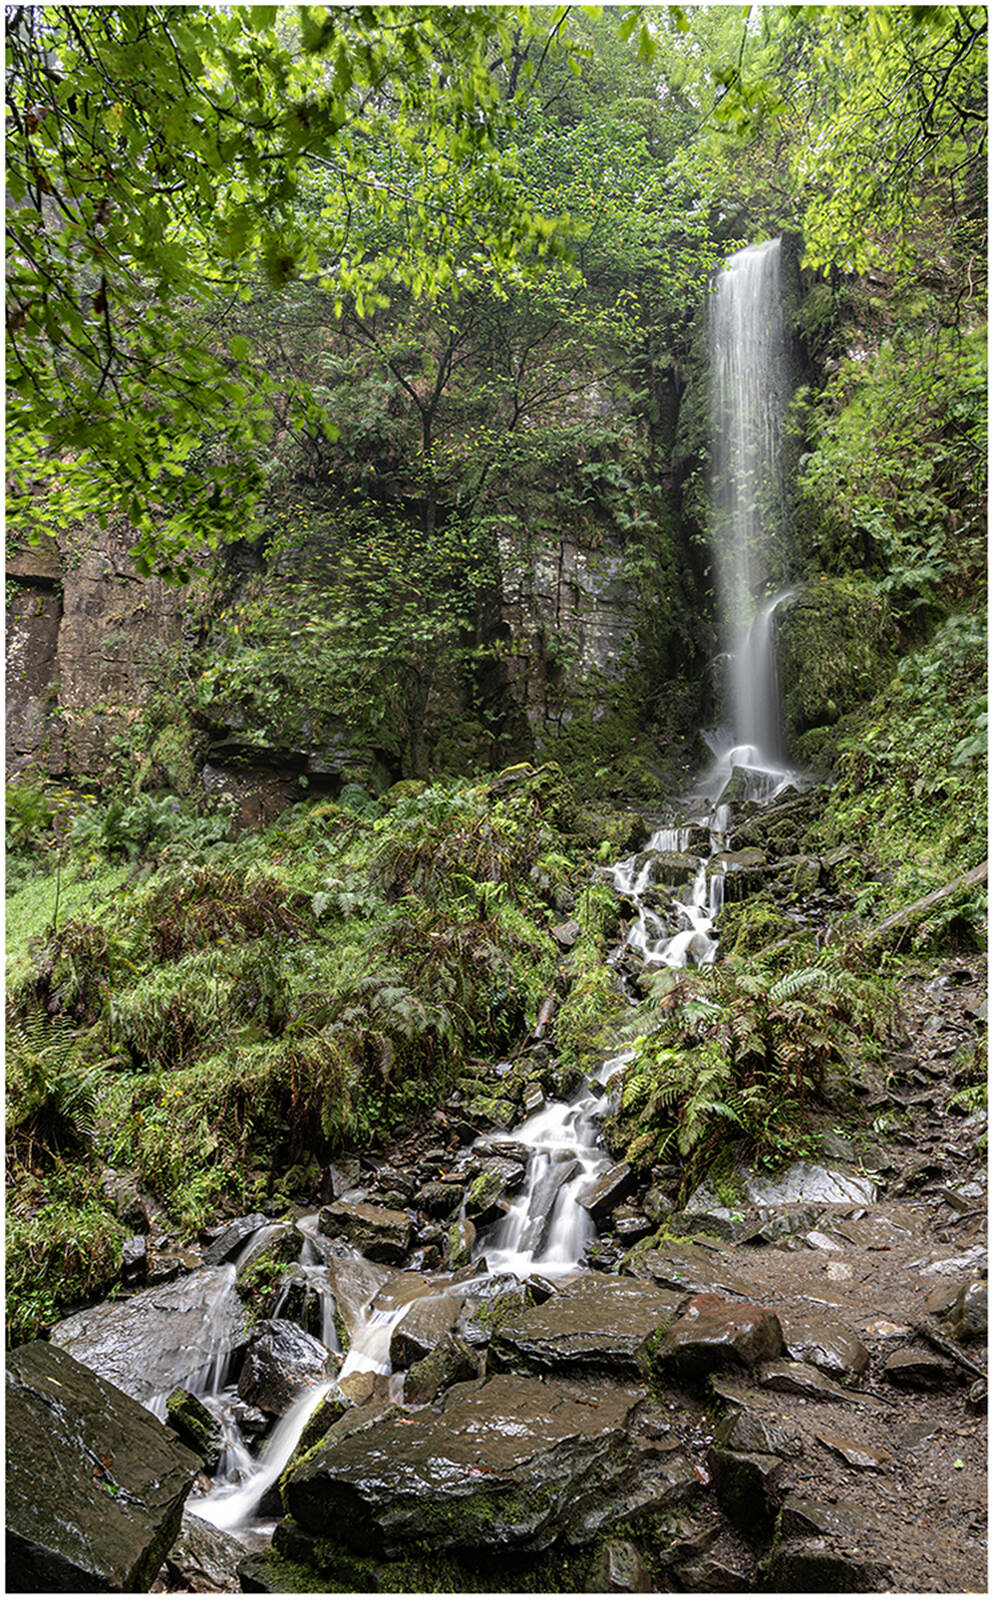 Image of Melincourt Falls by Chris Gledhill